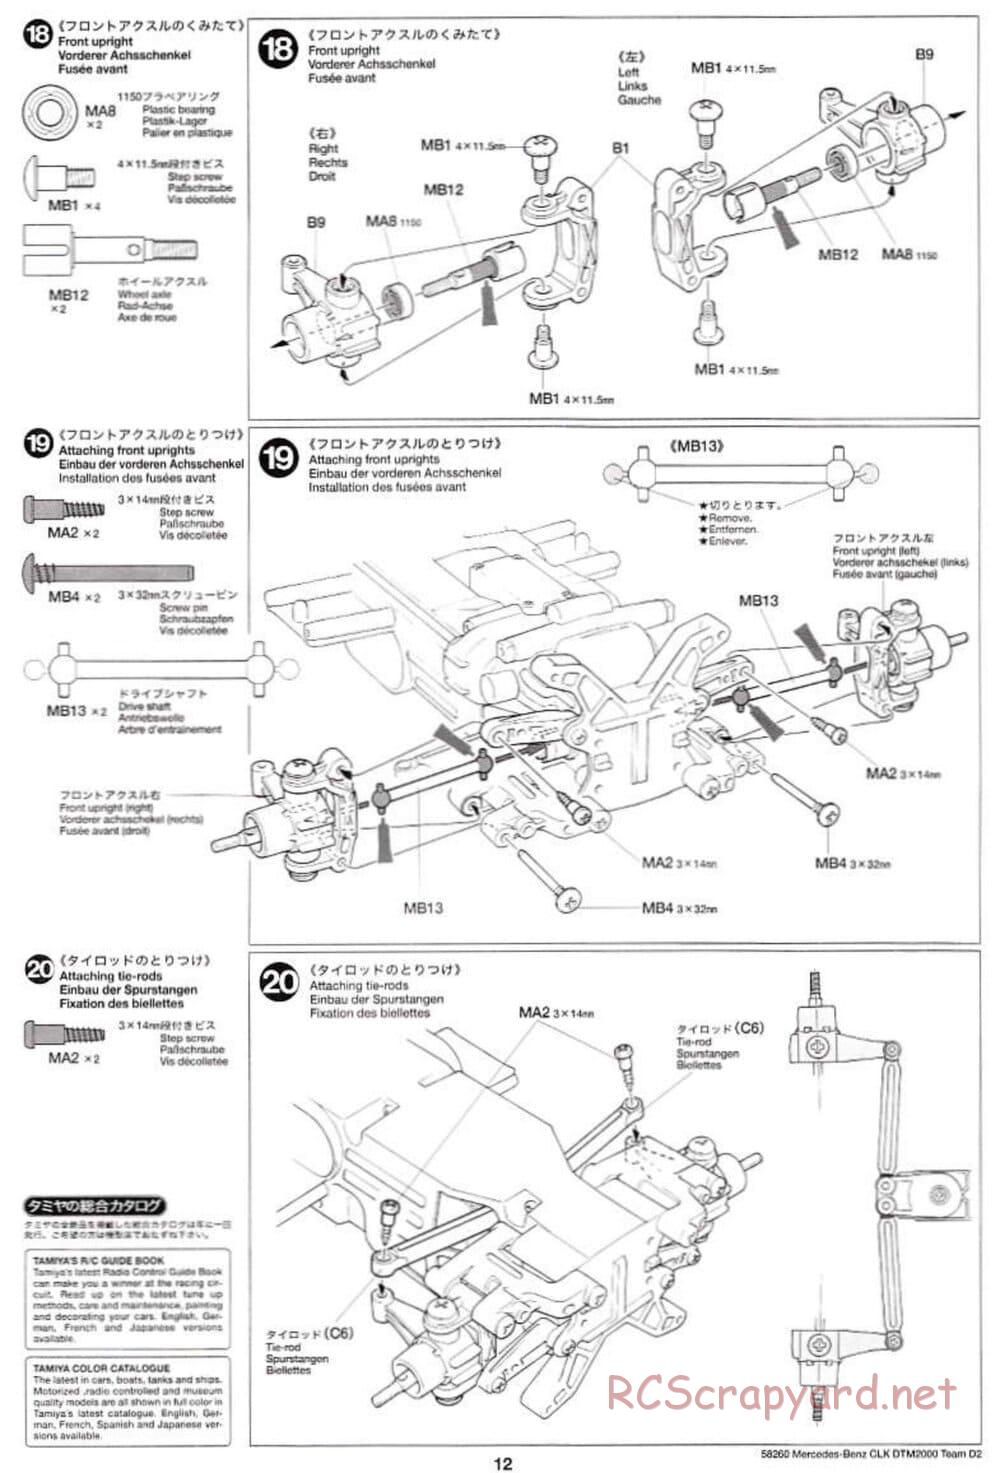 Tamiya - Mercedes Benz CLK DTM 2000 Team D2 - TL-01 Chassis - Manual - Page 12